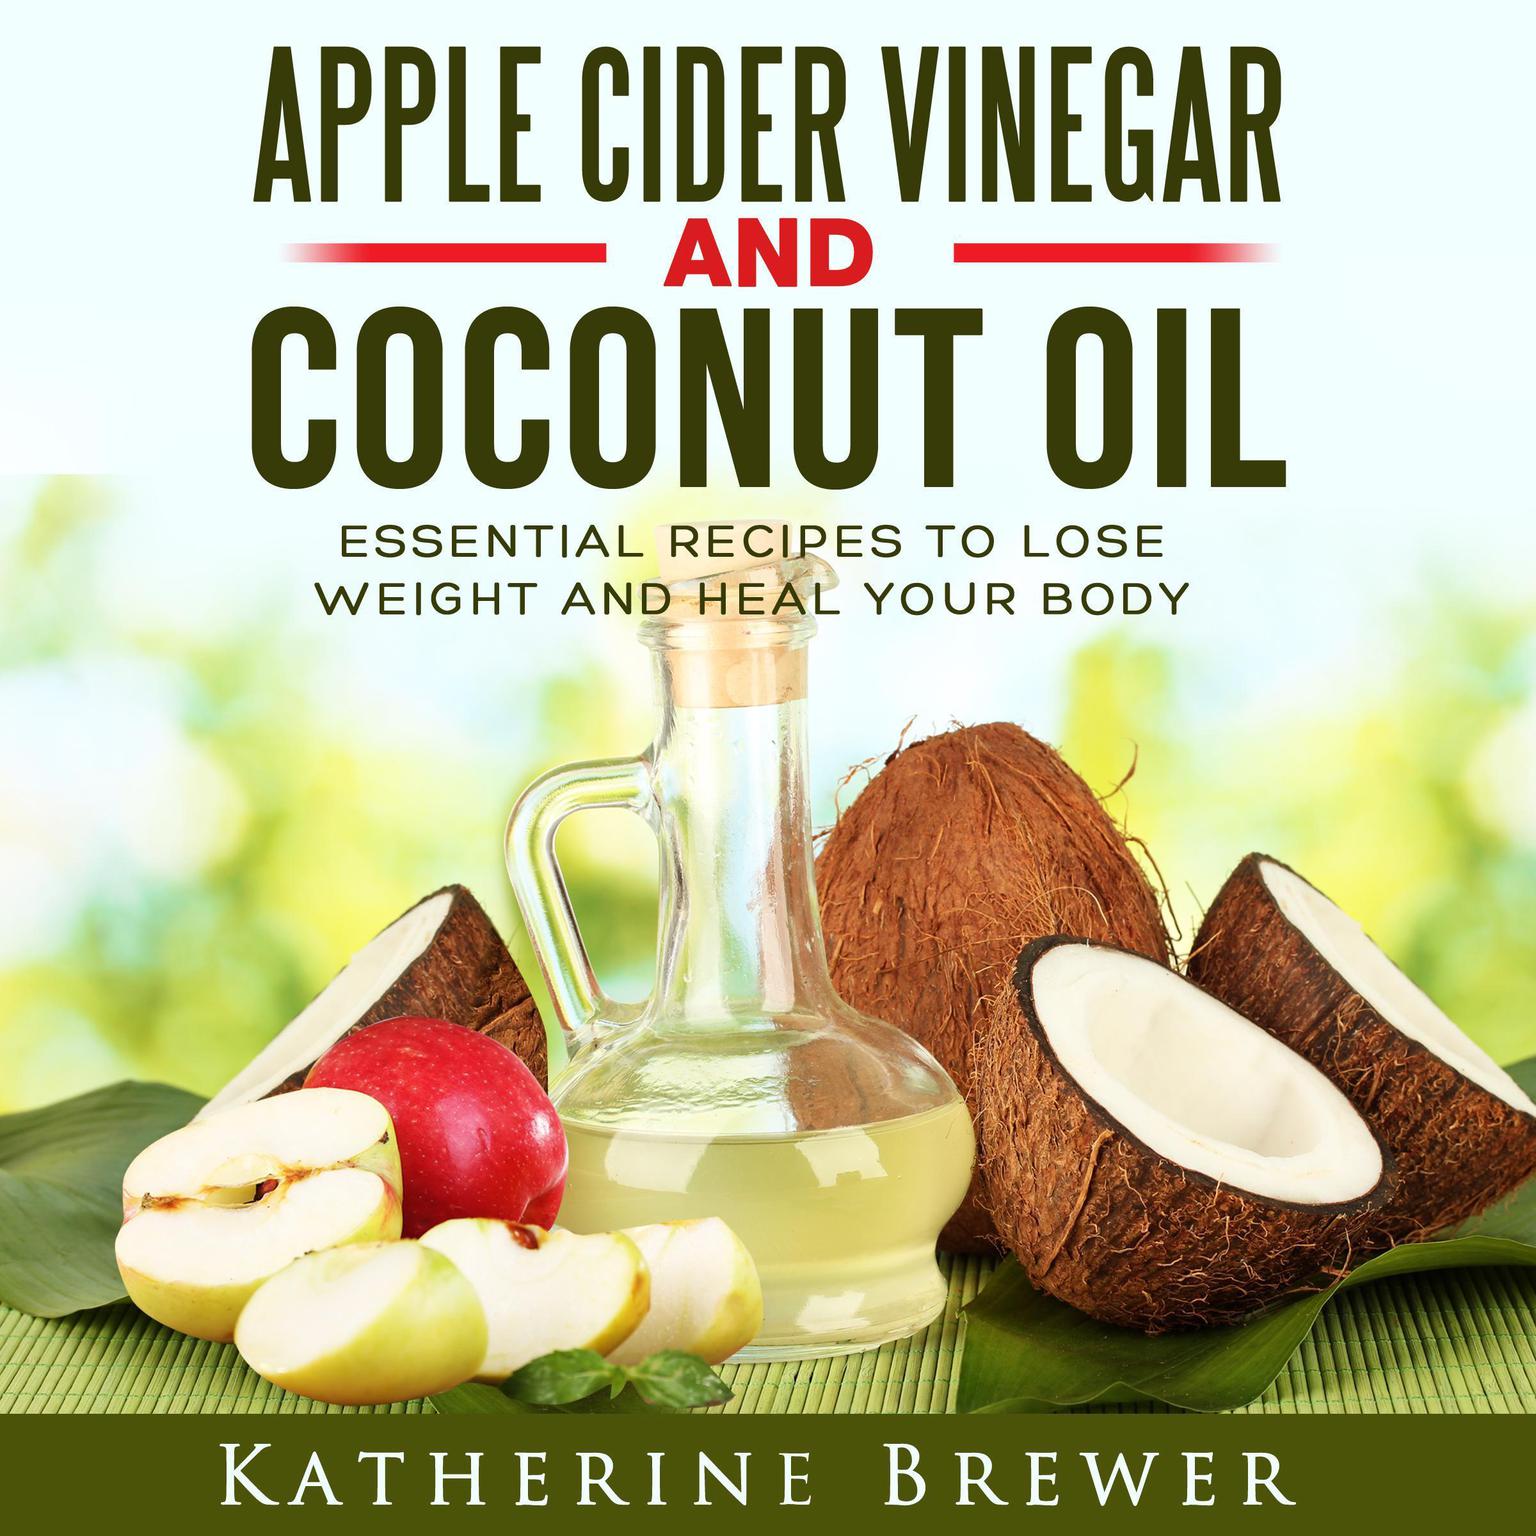 Apple Cider Vinegar and Coconut Oil: Essential Recipes to Lose Weight and Heal Your Body Audiobook, by Katherine Brewer